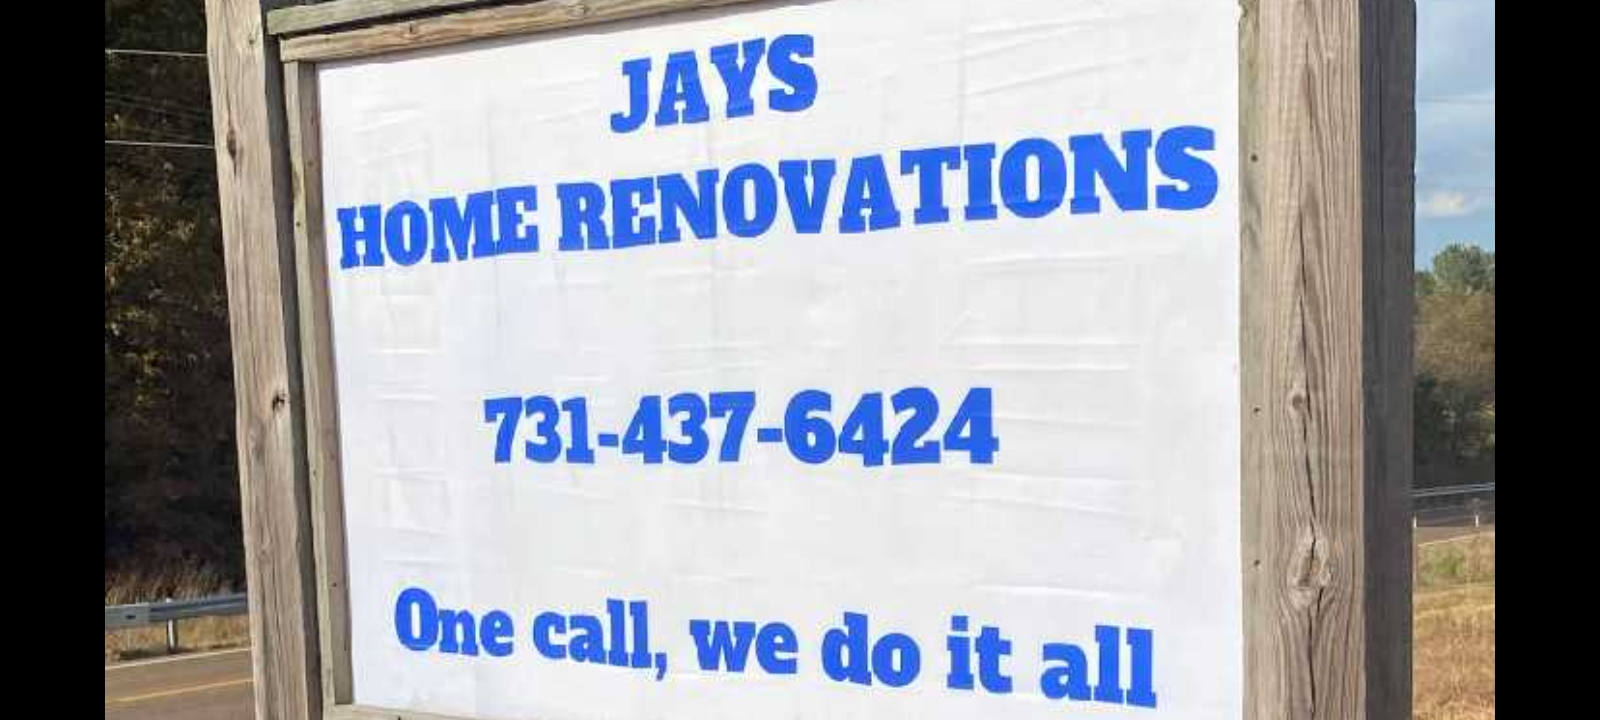 Jays Home Renovations and Repairs 22940 TN-18, Toone Tennessee 38381